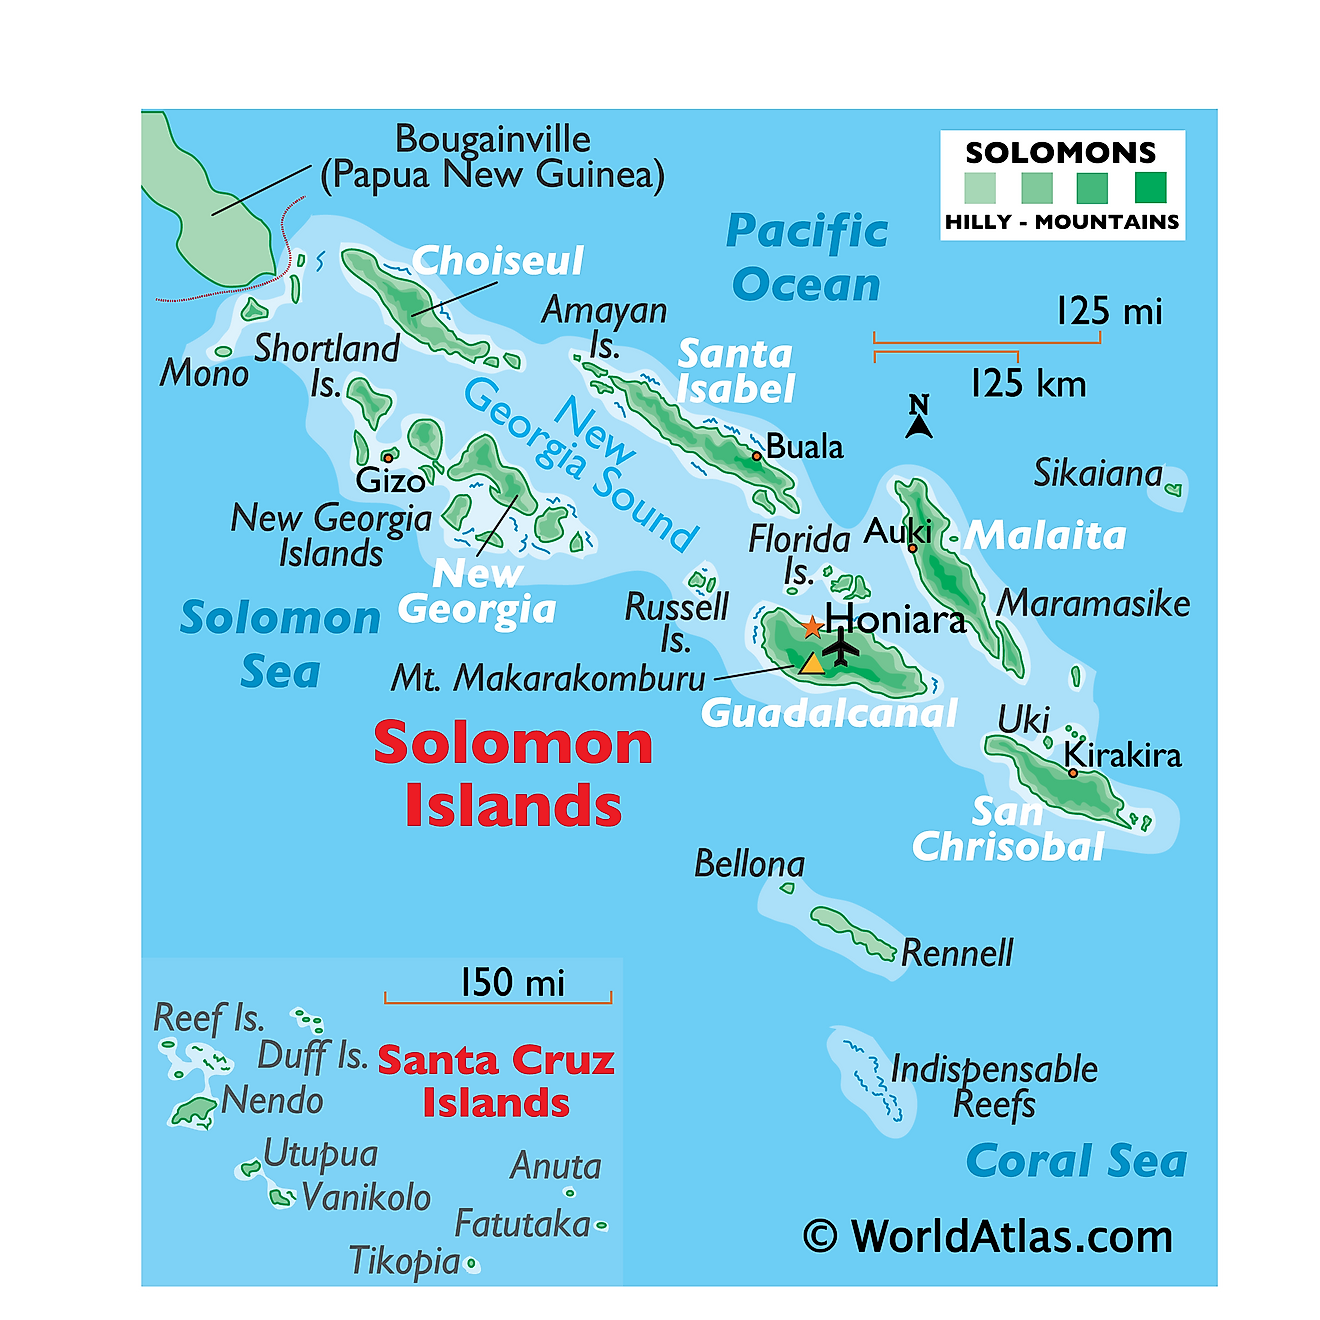 Physical Map of the Solomon Islands showing the 6 major islands, relief, New Georgia Sounds, smaller islands, and more.